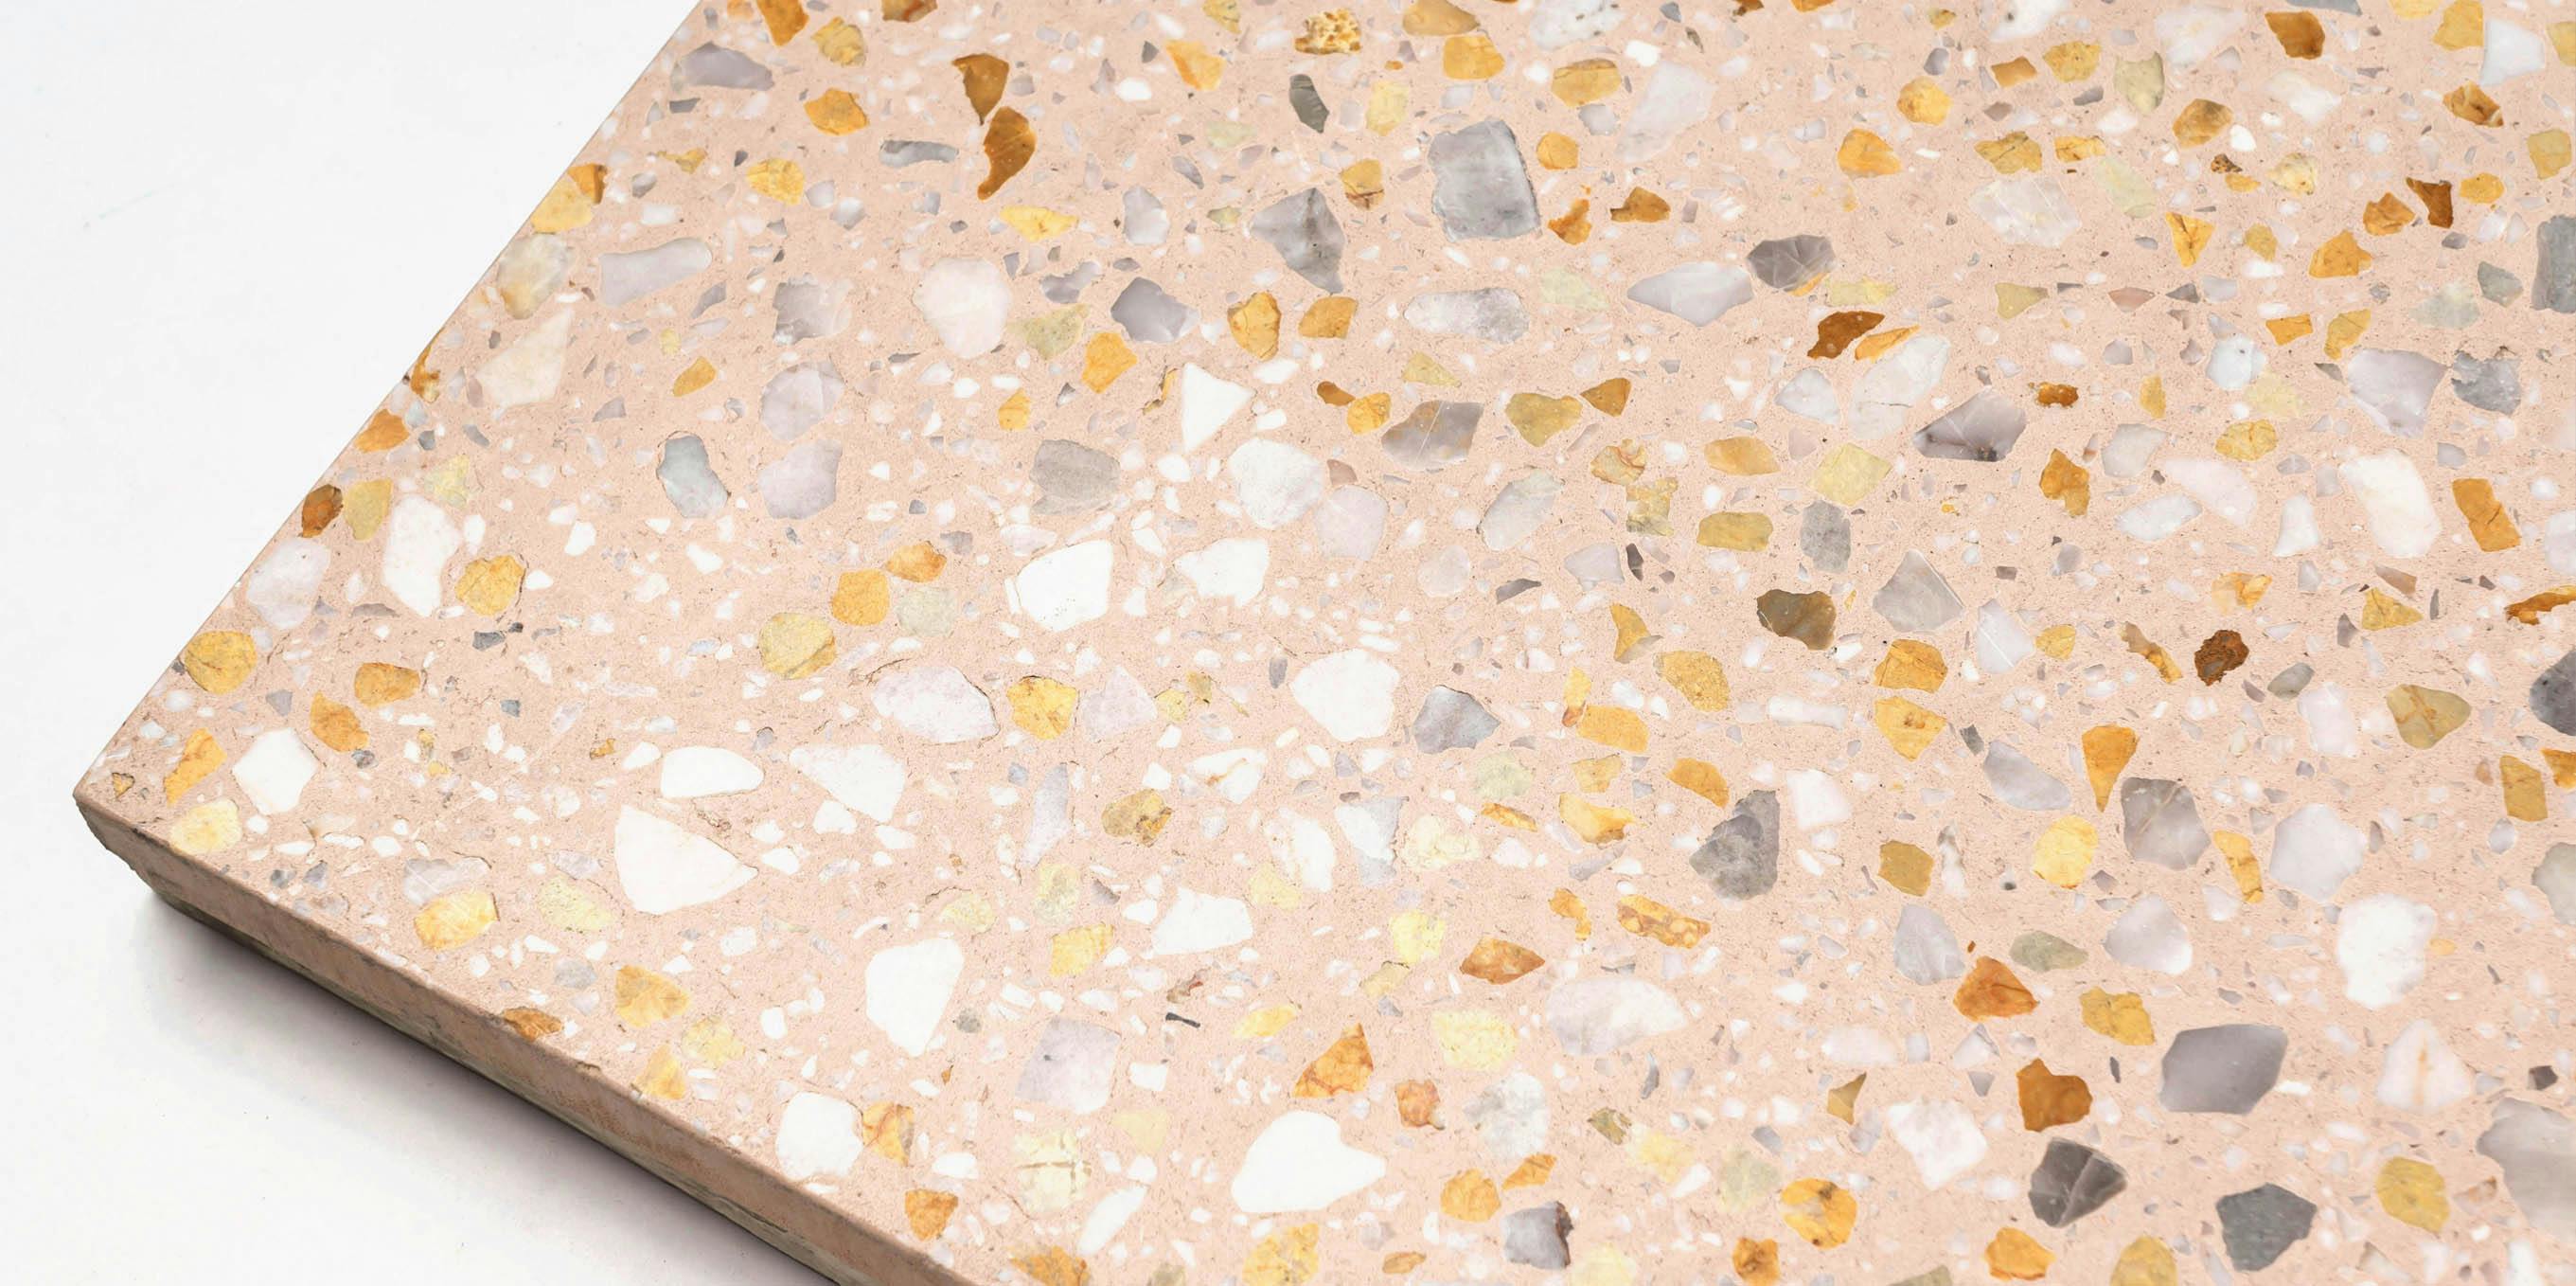 Terrazzo collection featured image.